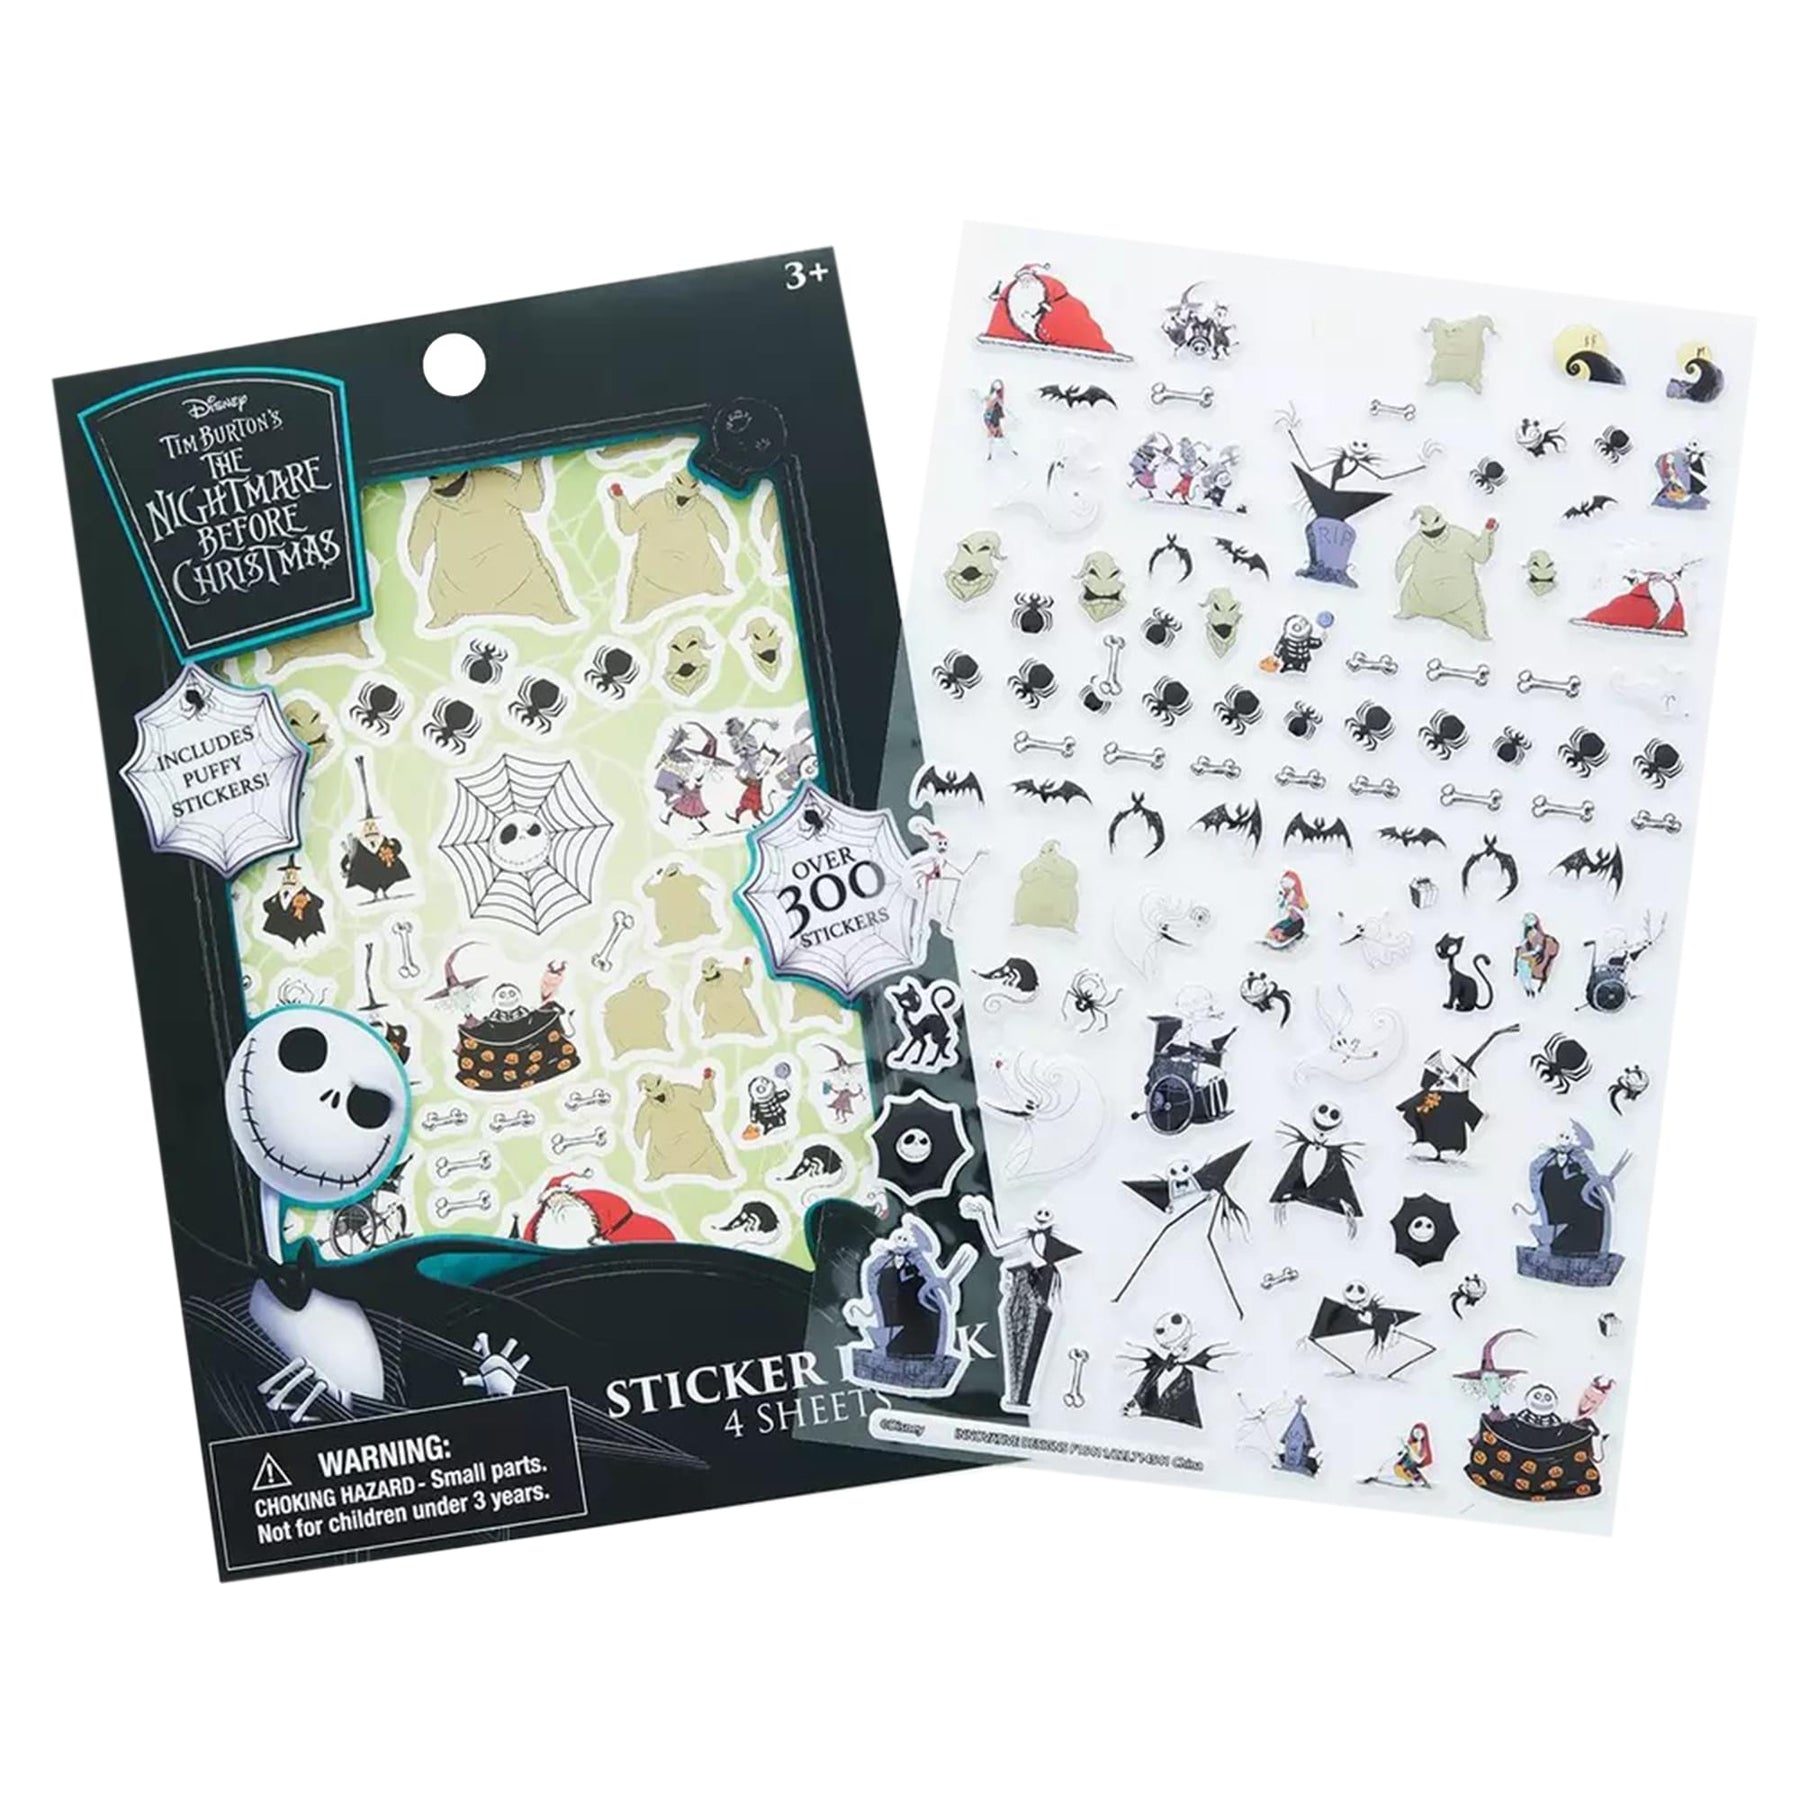 Disney Nightmare Before Christmas Sticker Book | 4 Sheets | Over 300 Stickers